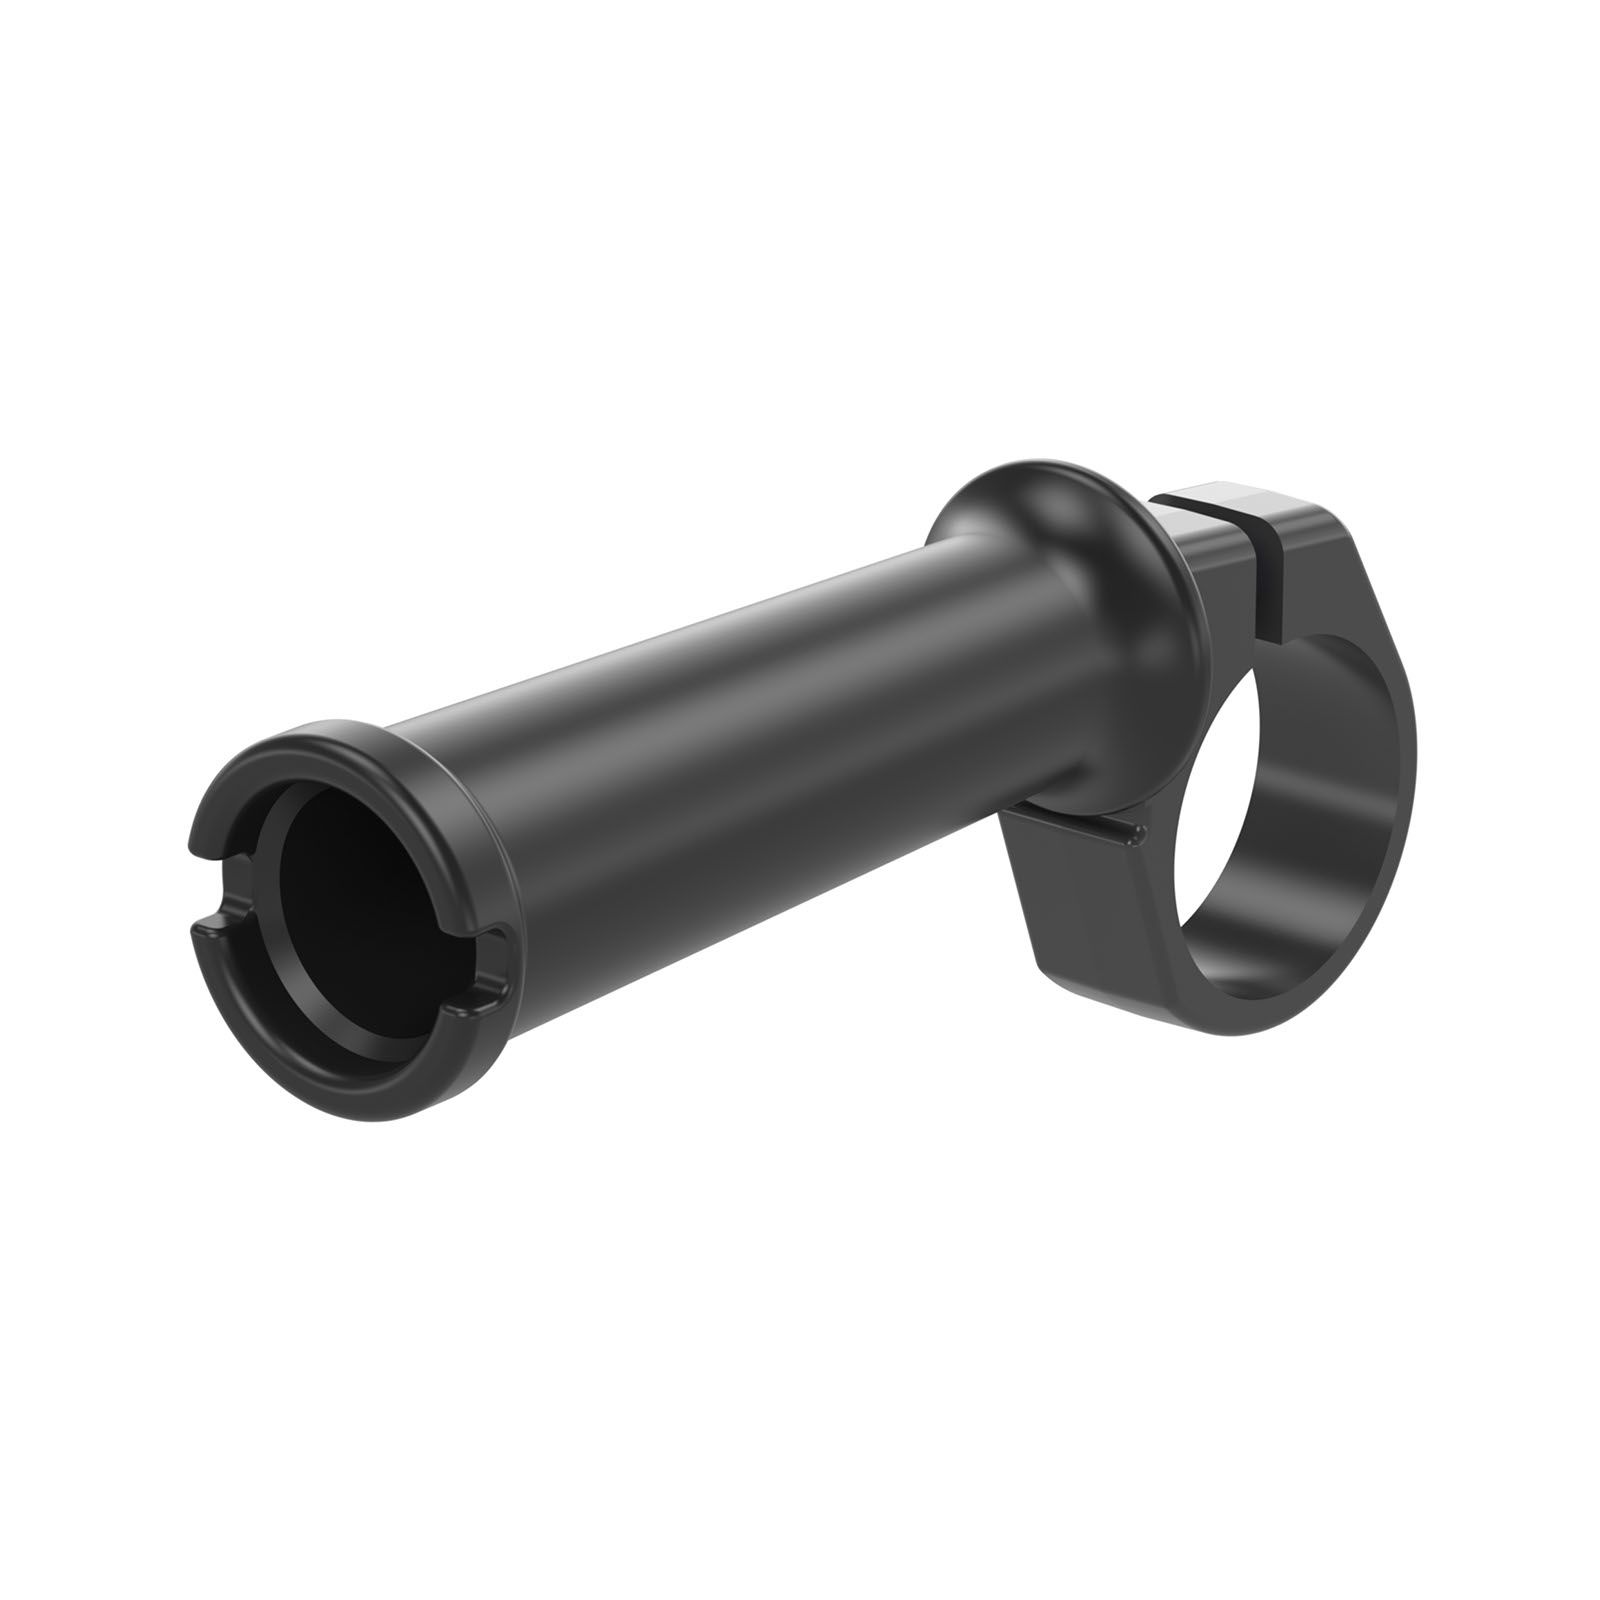 Support handle - LBB36/37 productfoto